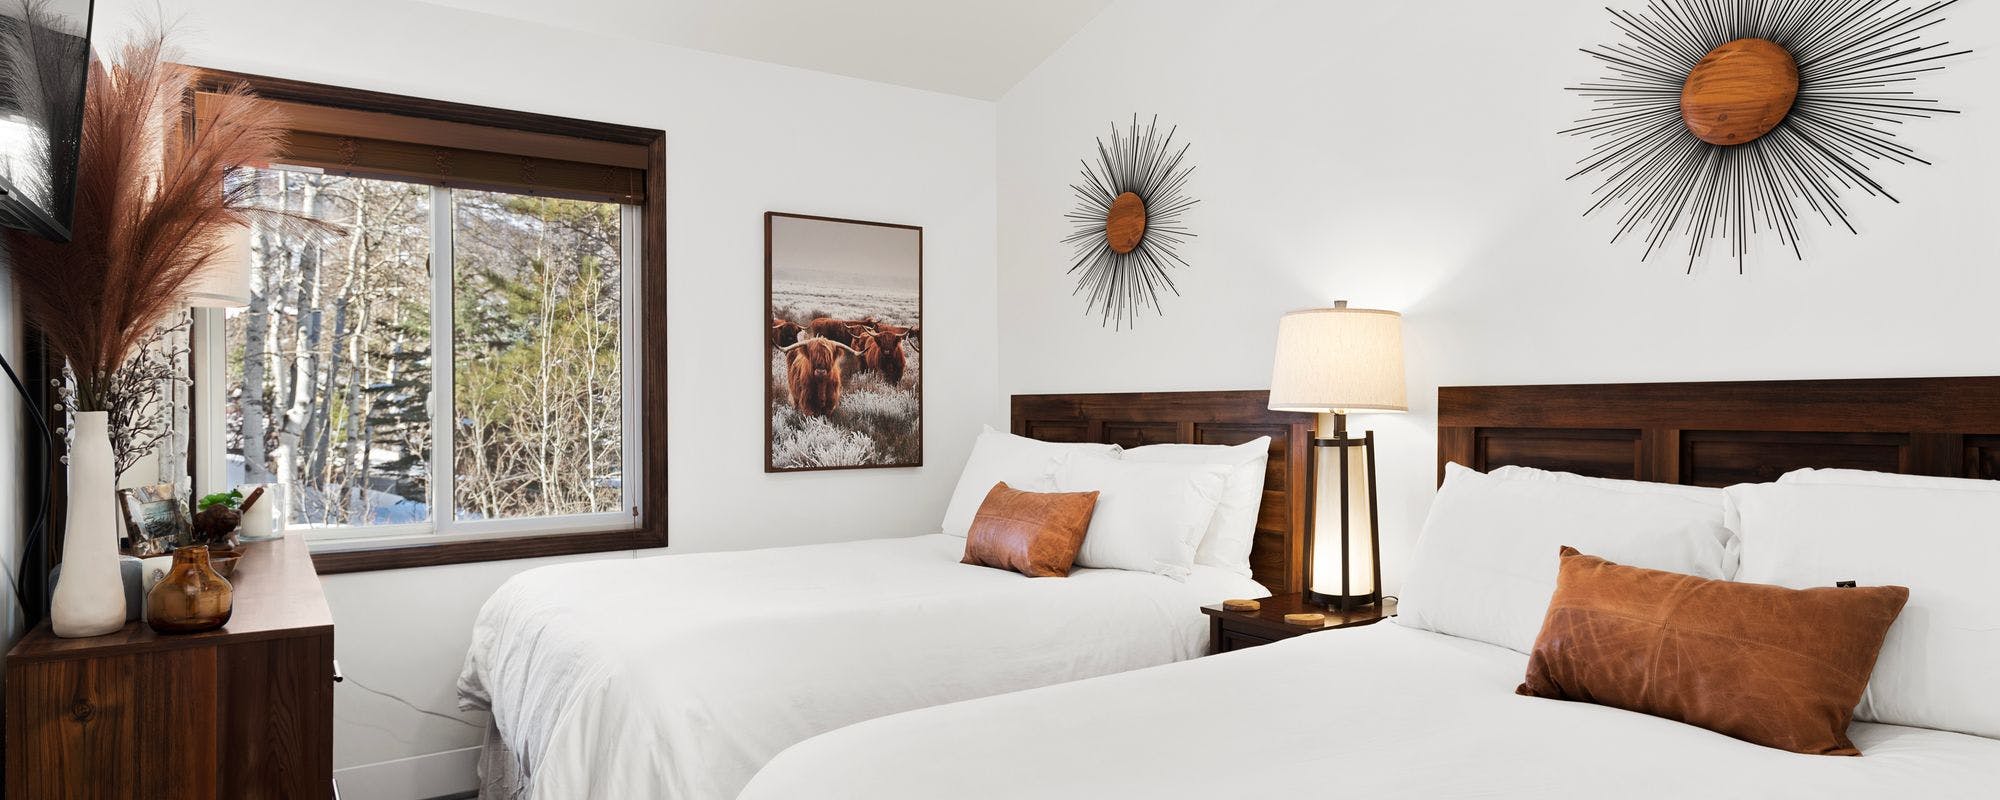 Beautifully decorated bedroom at a Snowmass Vacations rental home